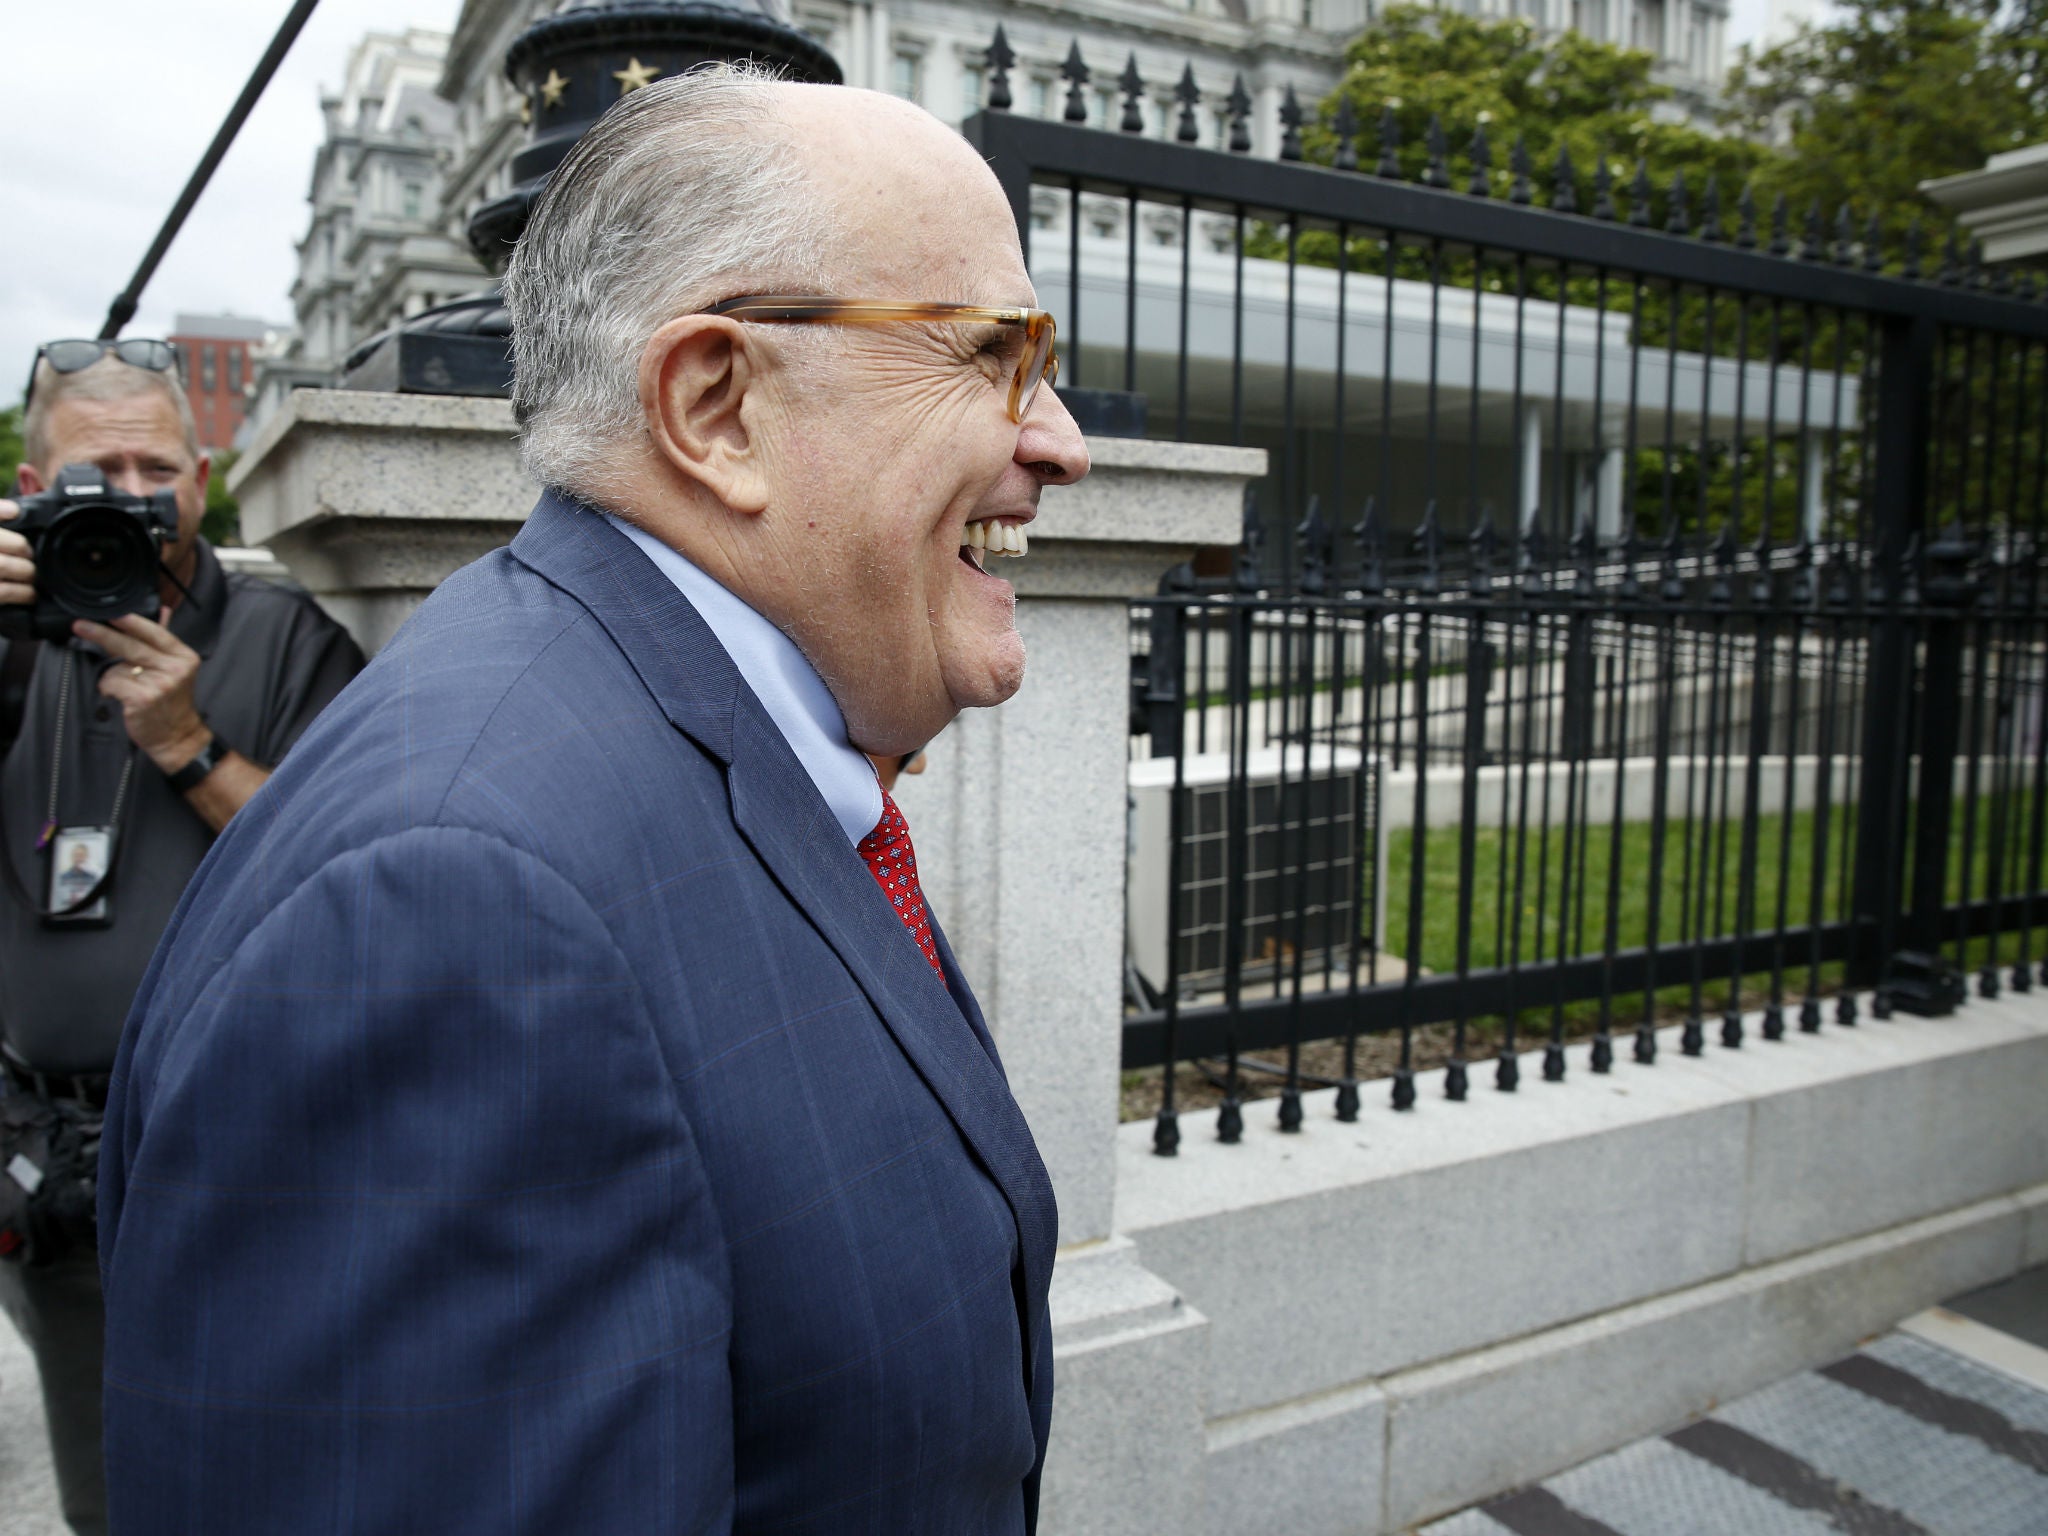 Rudy Giuliani said Mr Trump's legal team was 'leaning toward not' agreeing to an interview with special counsel Robert Mueller